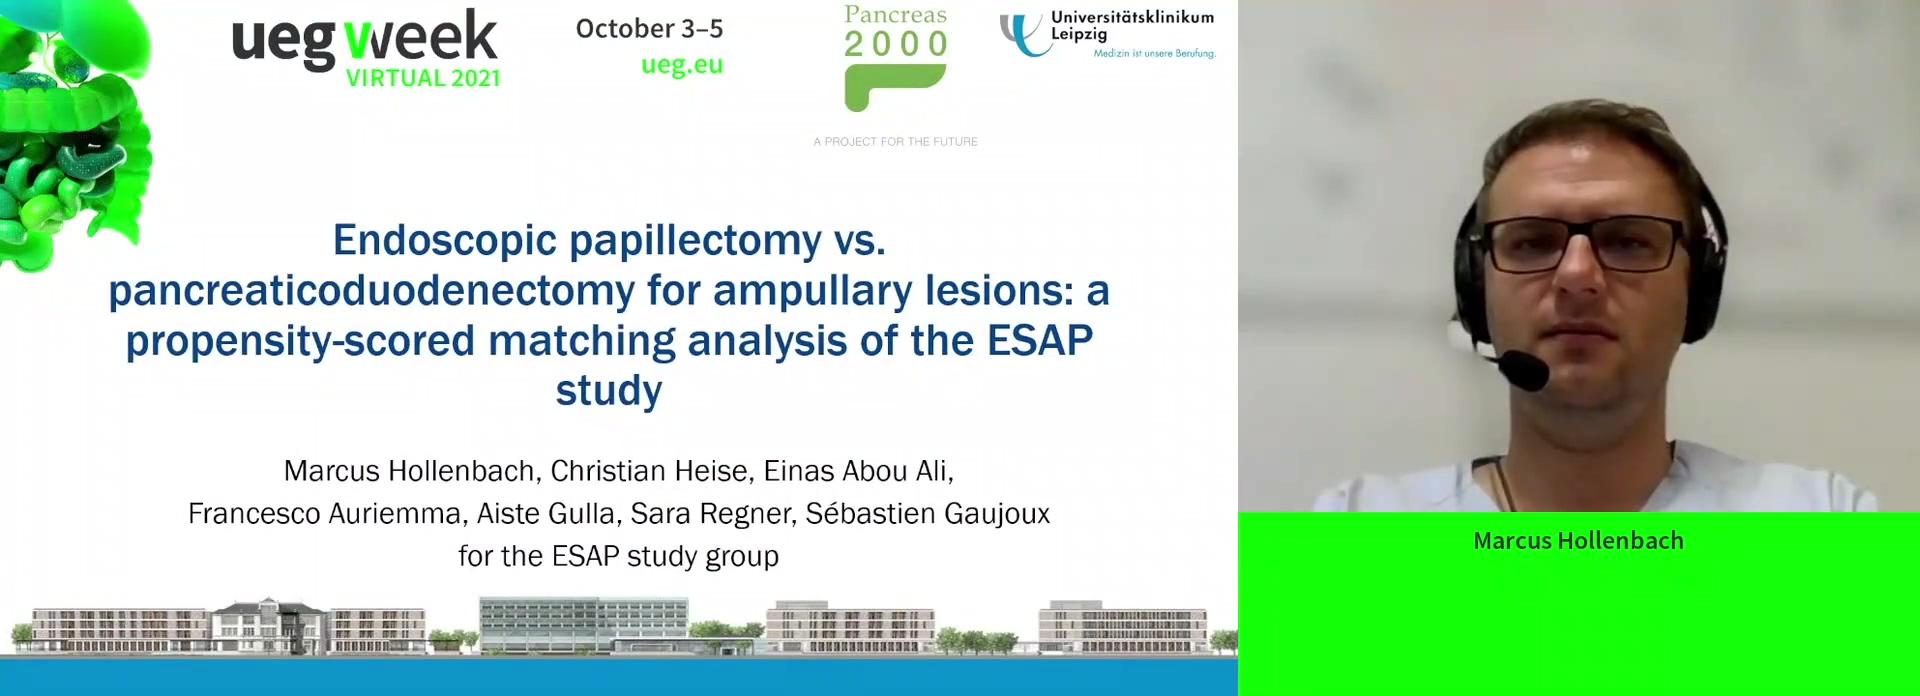 ENDOSCOPIC PAPILLECTOMY VS. PANCREATICODUODENECTOMY FOR AMPULLARY LESIONS: A PROPENSITY-SCORED MATCHING ANALYSIS OF THE ESAP STUDY